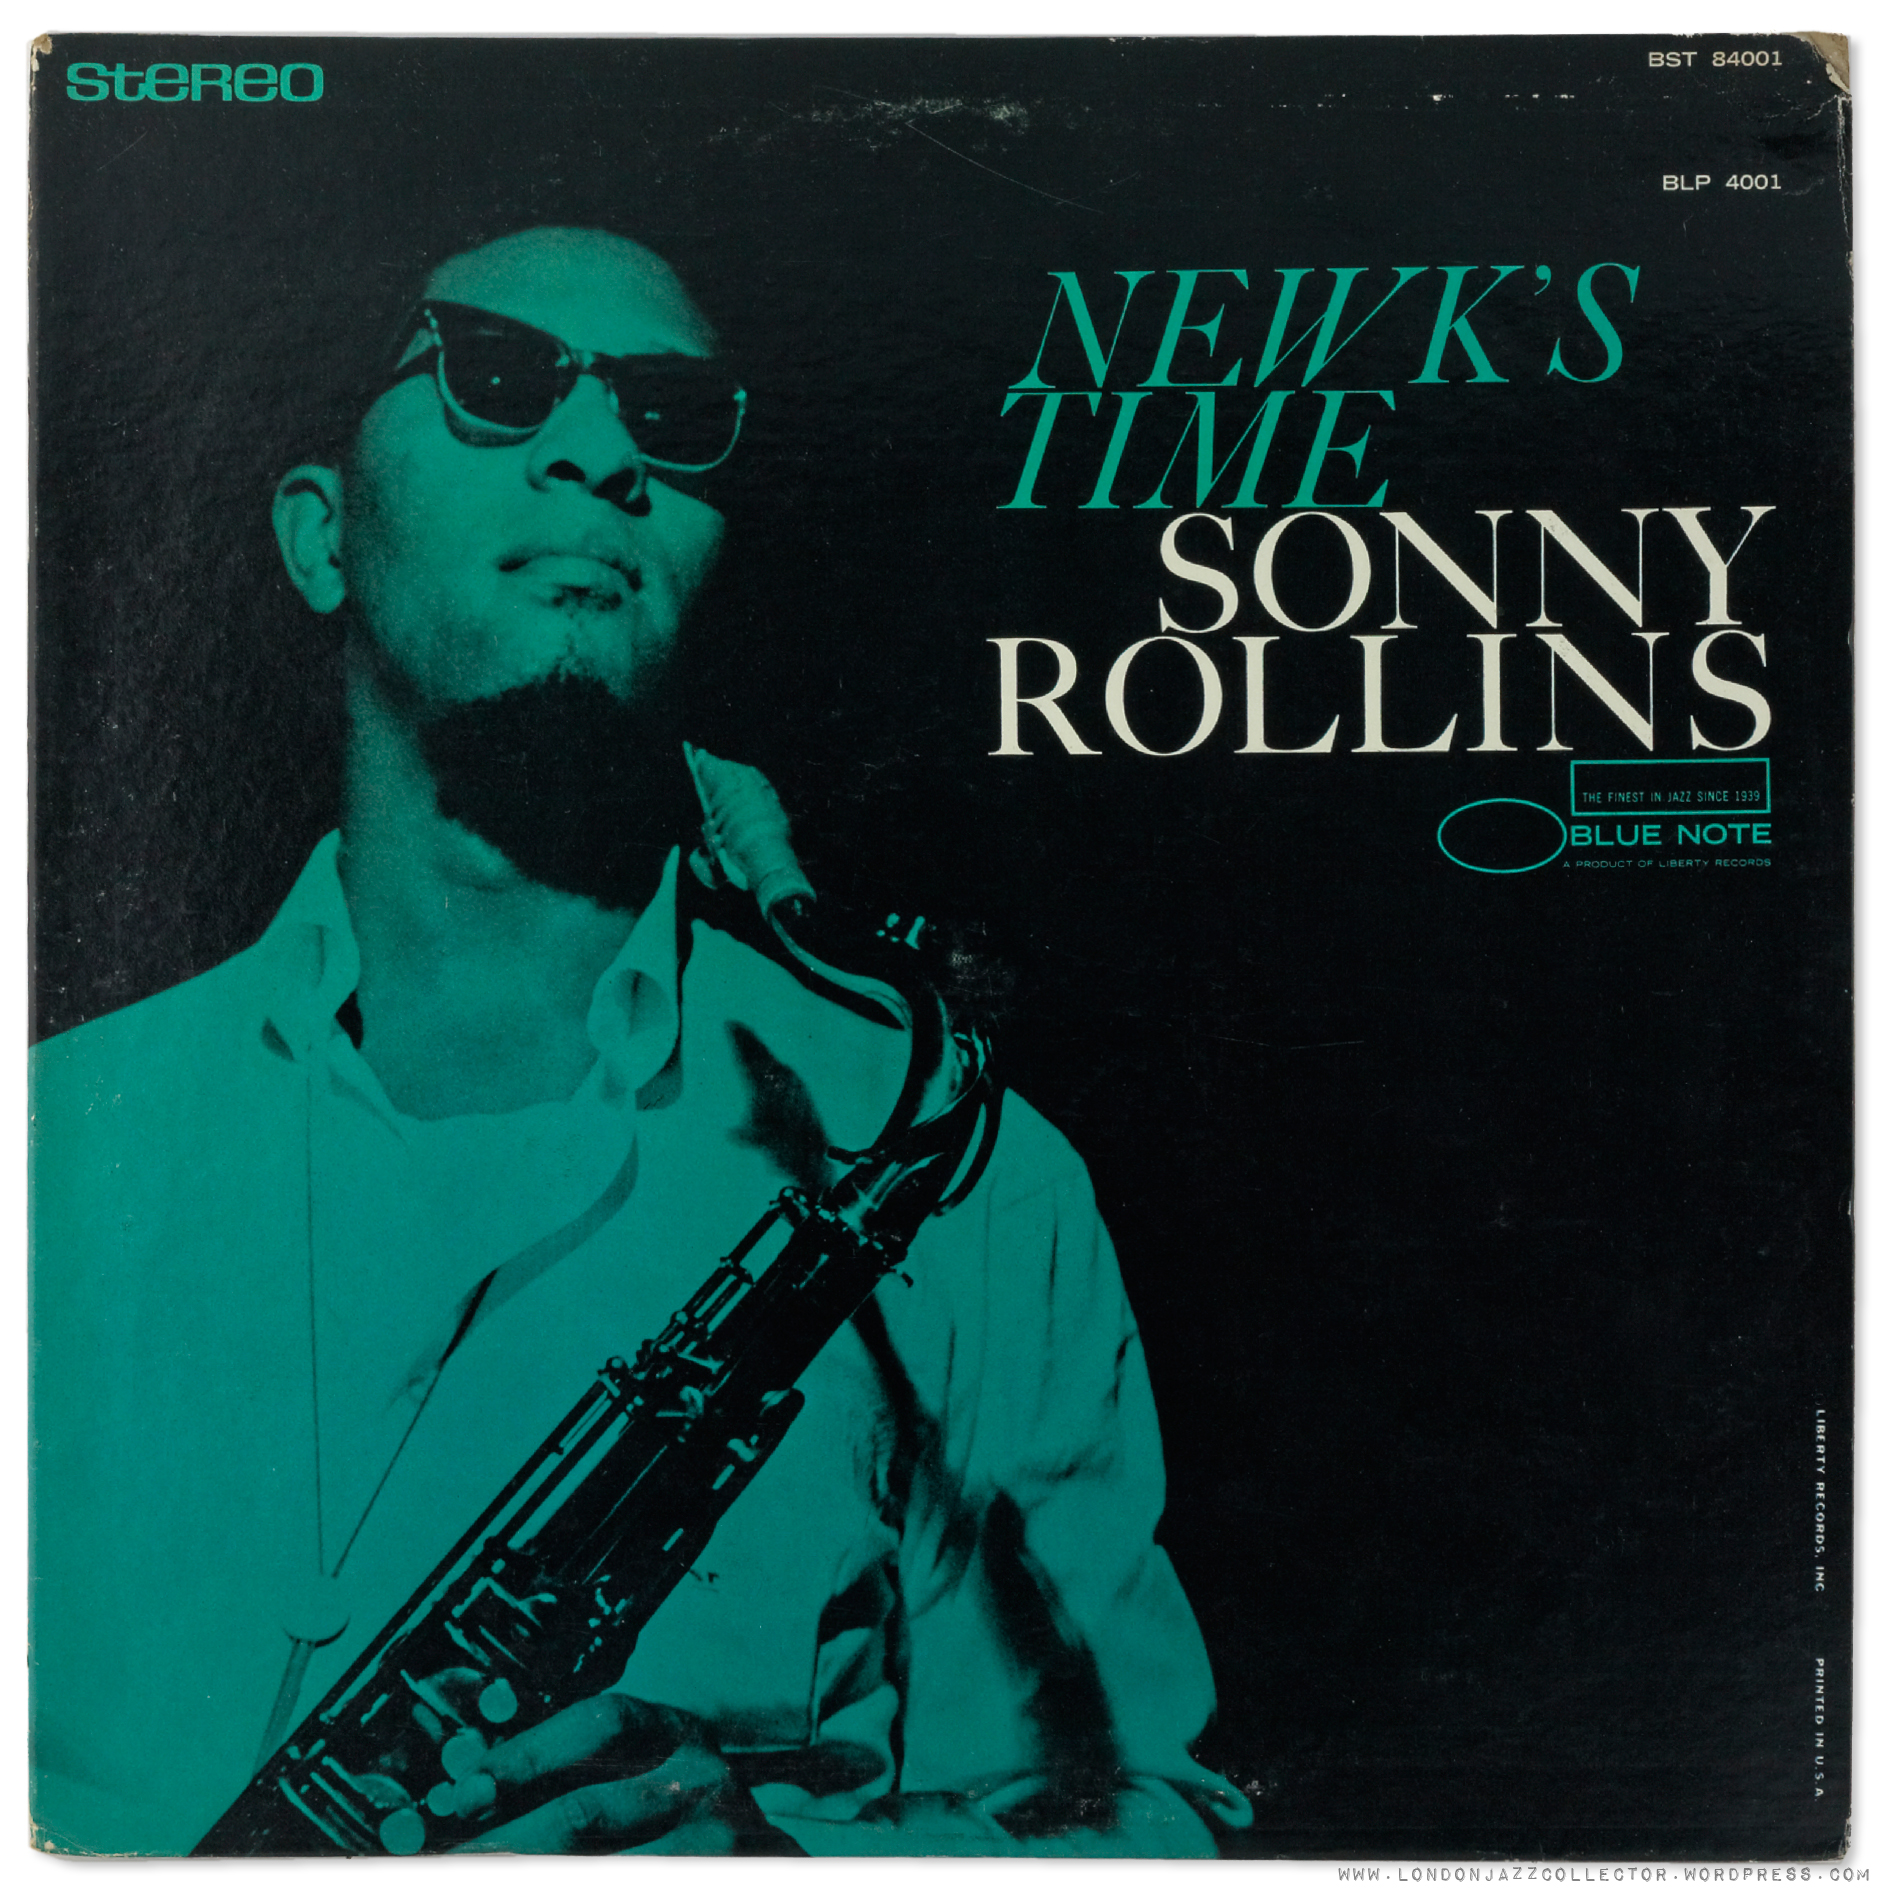 sonny-rollins-newks-time-liberty-stereo-